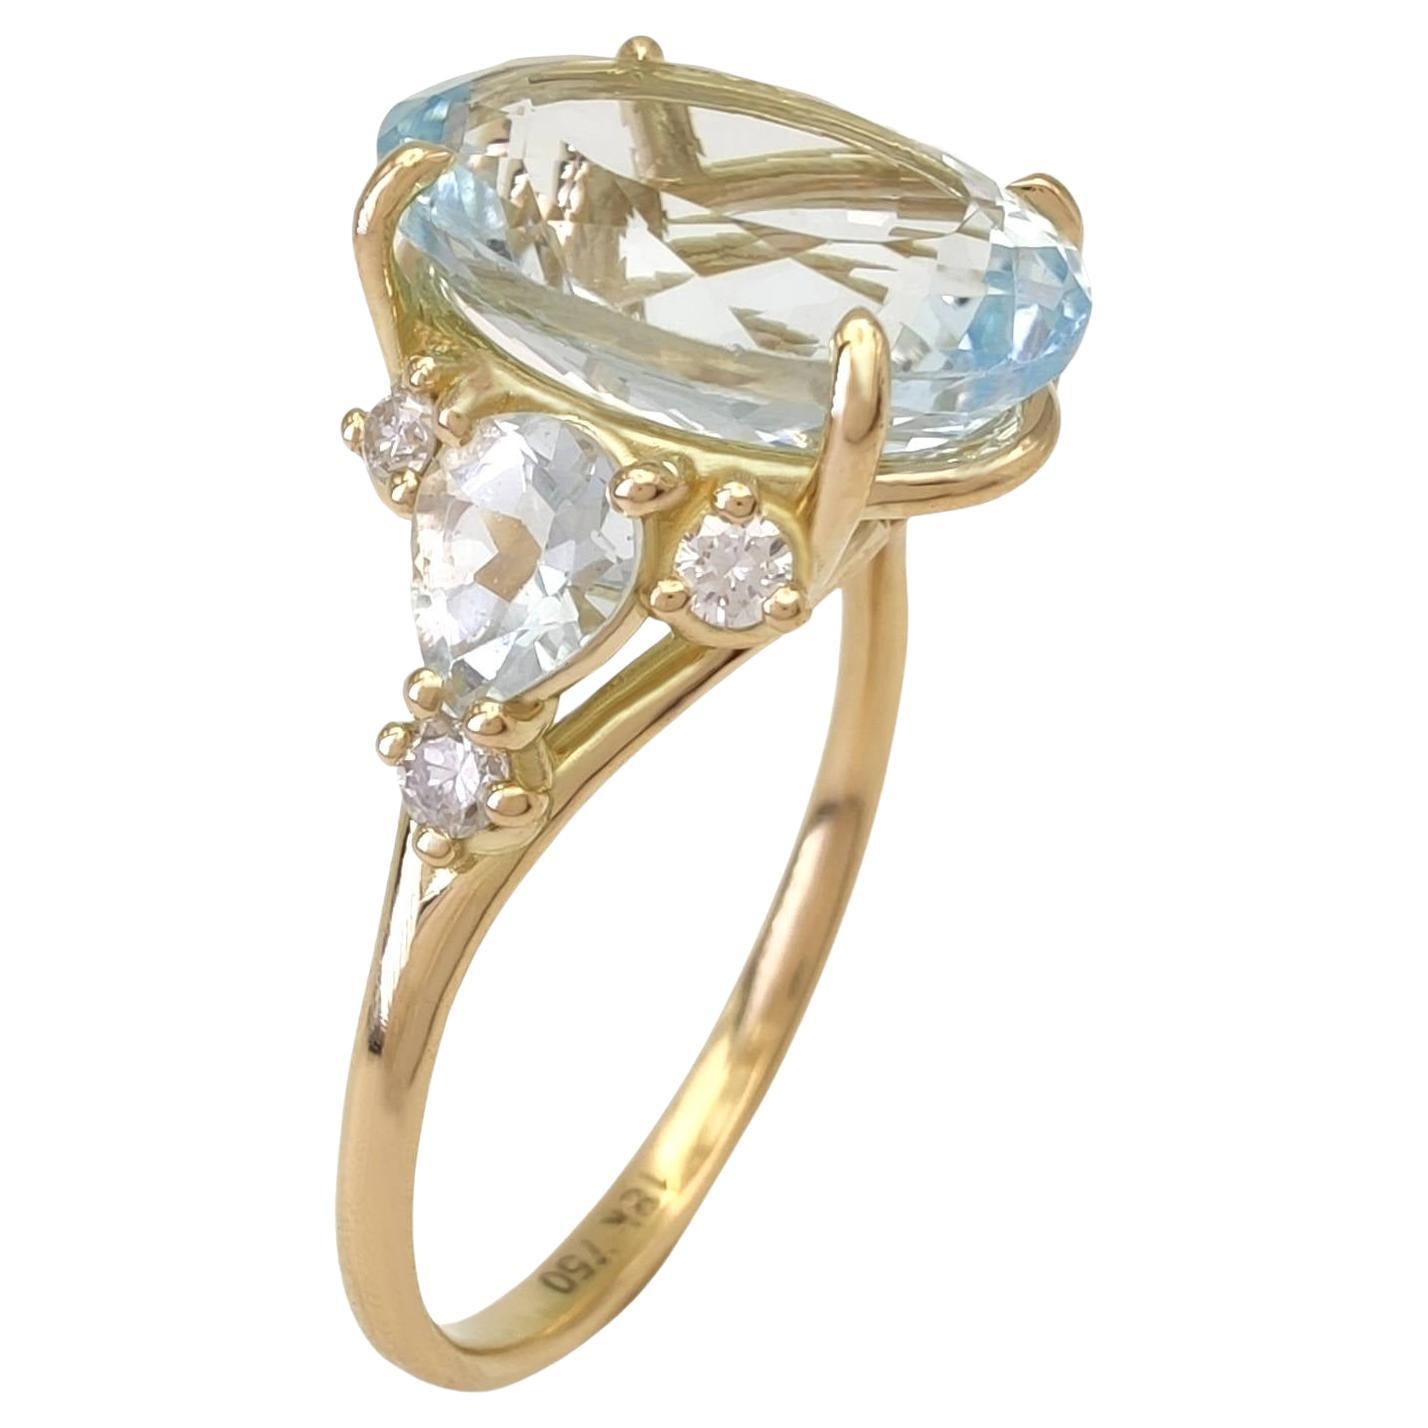 18K Gold Aquamarine Ring  Diamonds for Weddings, Engagements, proposals gifts 